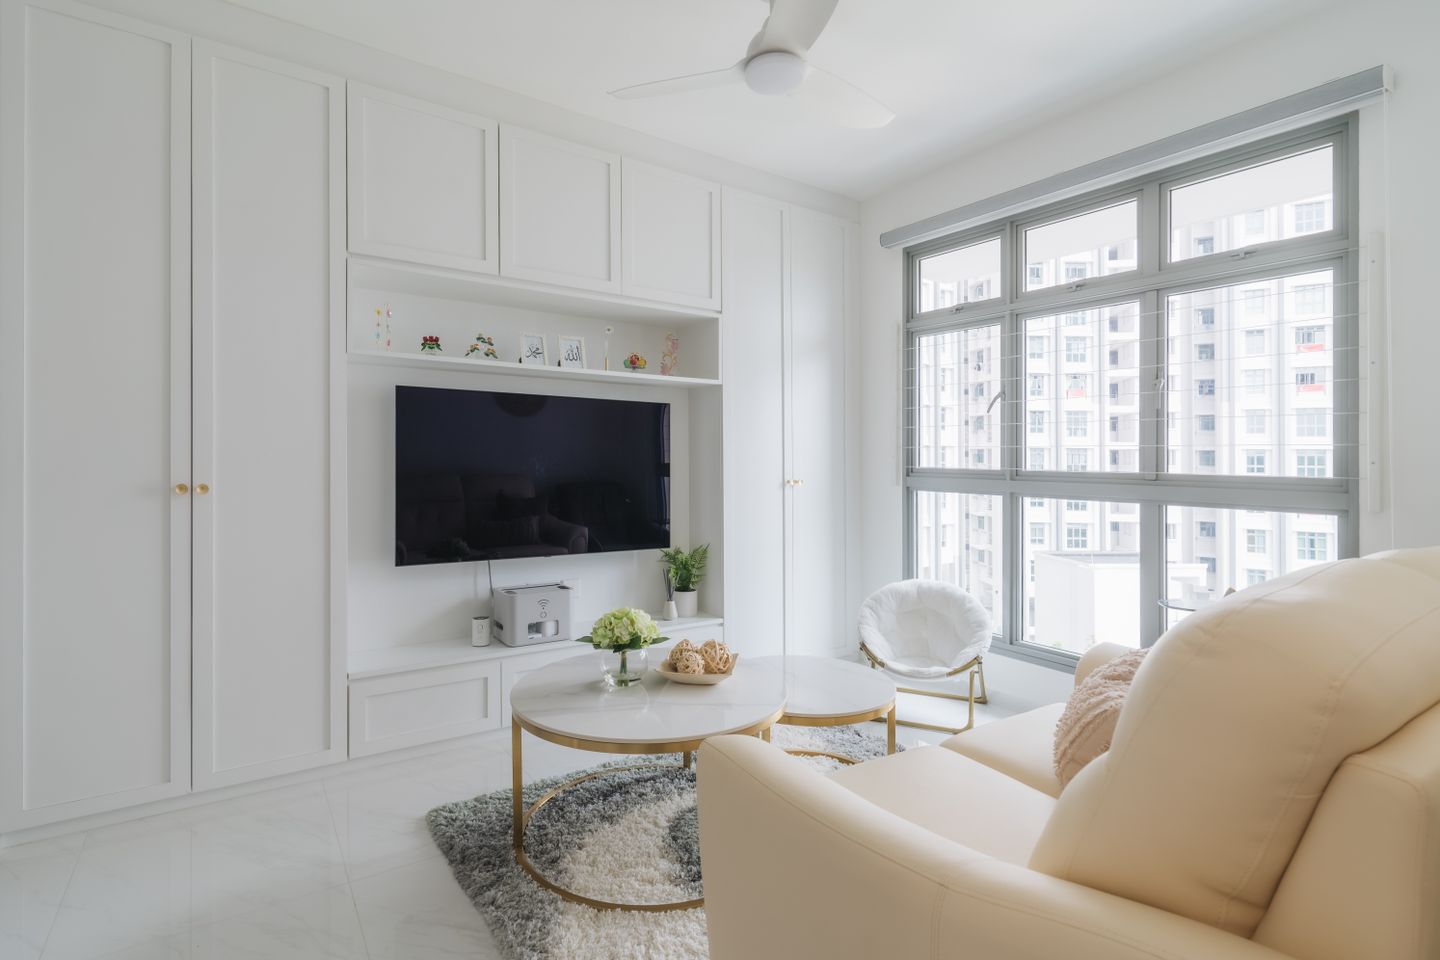 Classical TV Cabinet Design With White Drawers And Storage Units